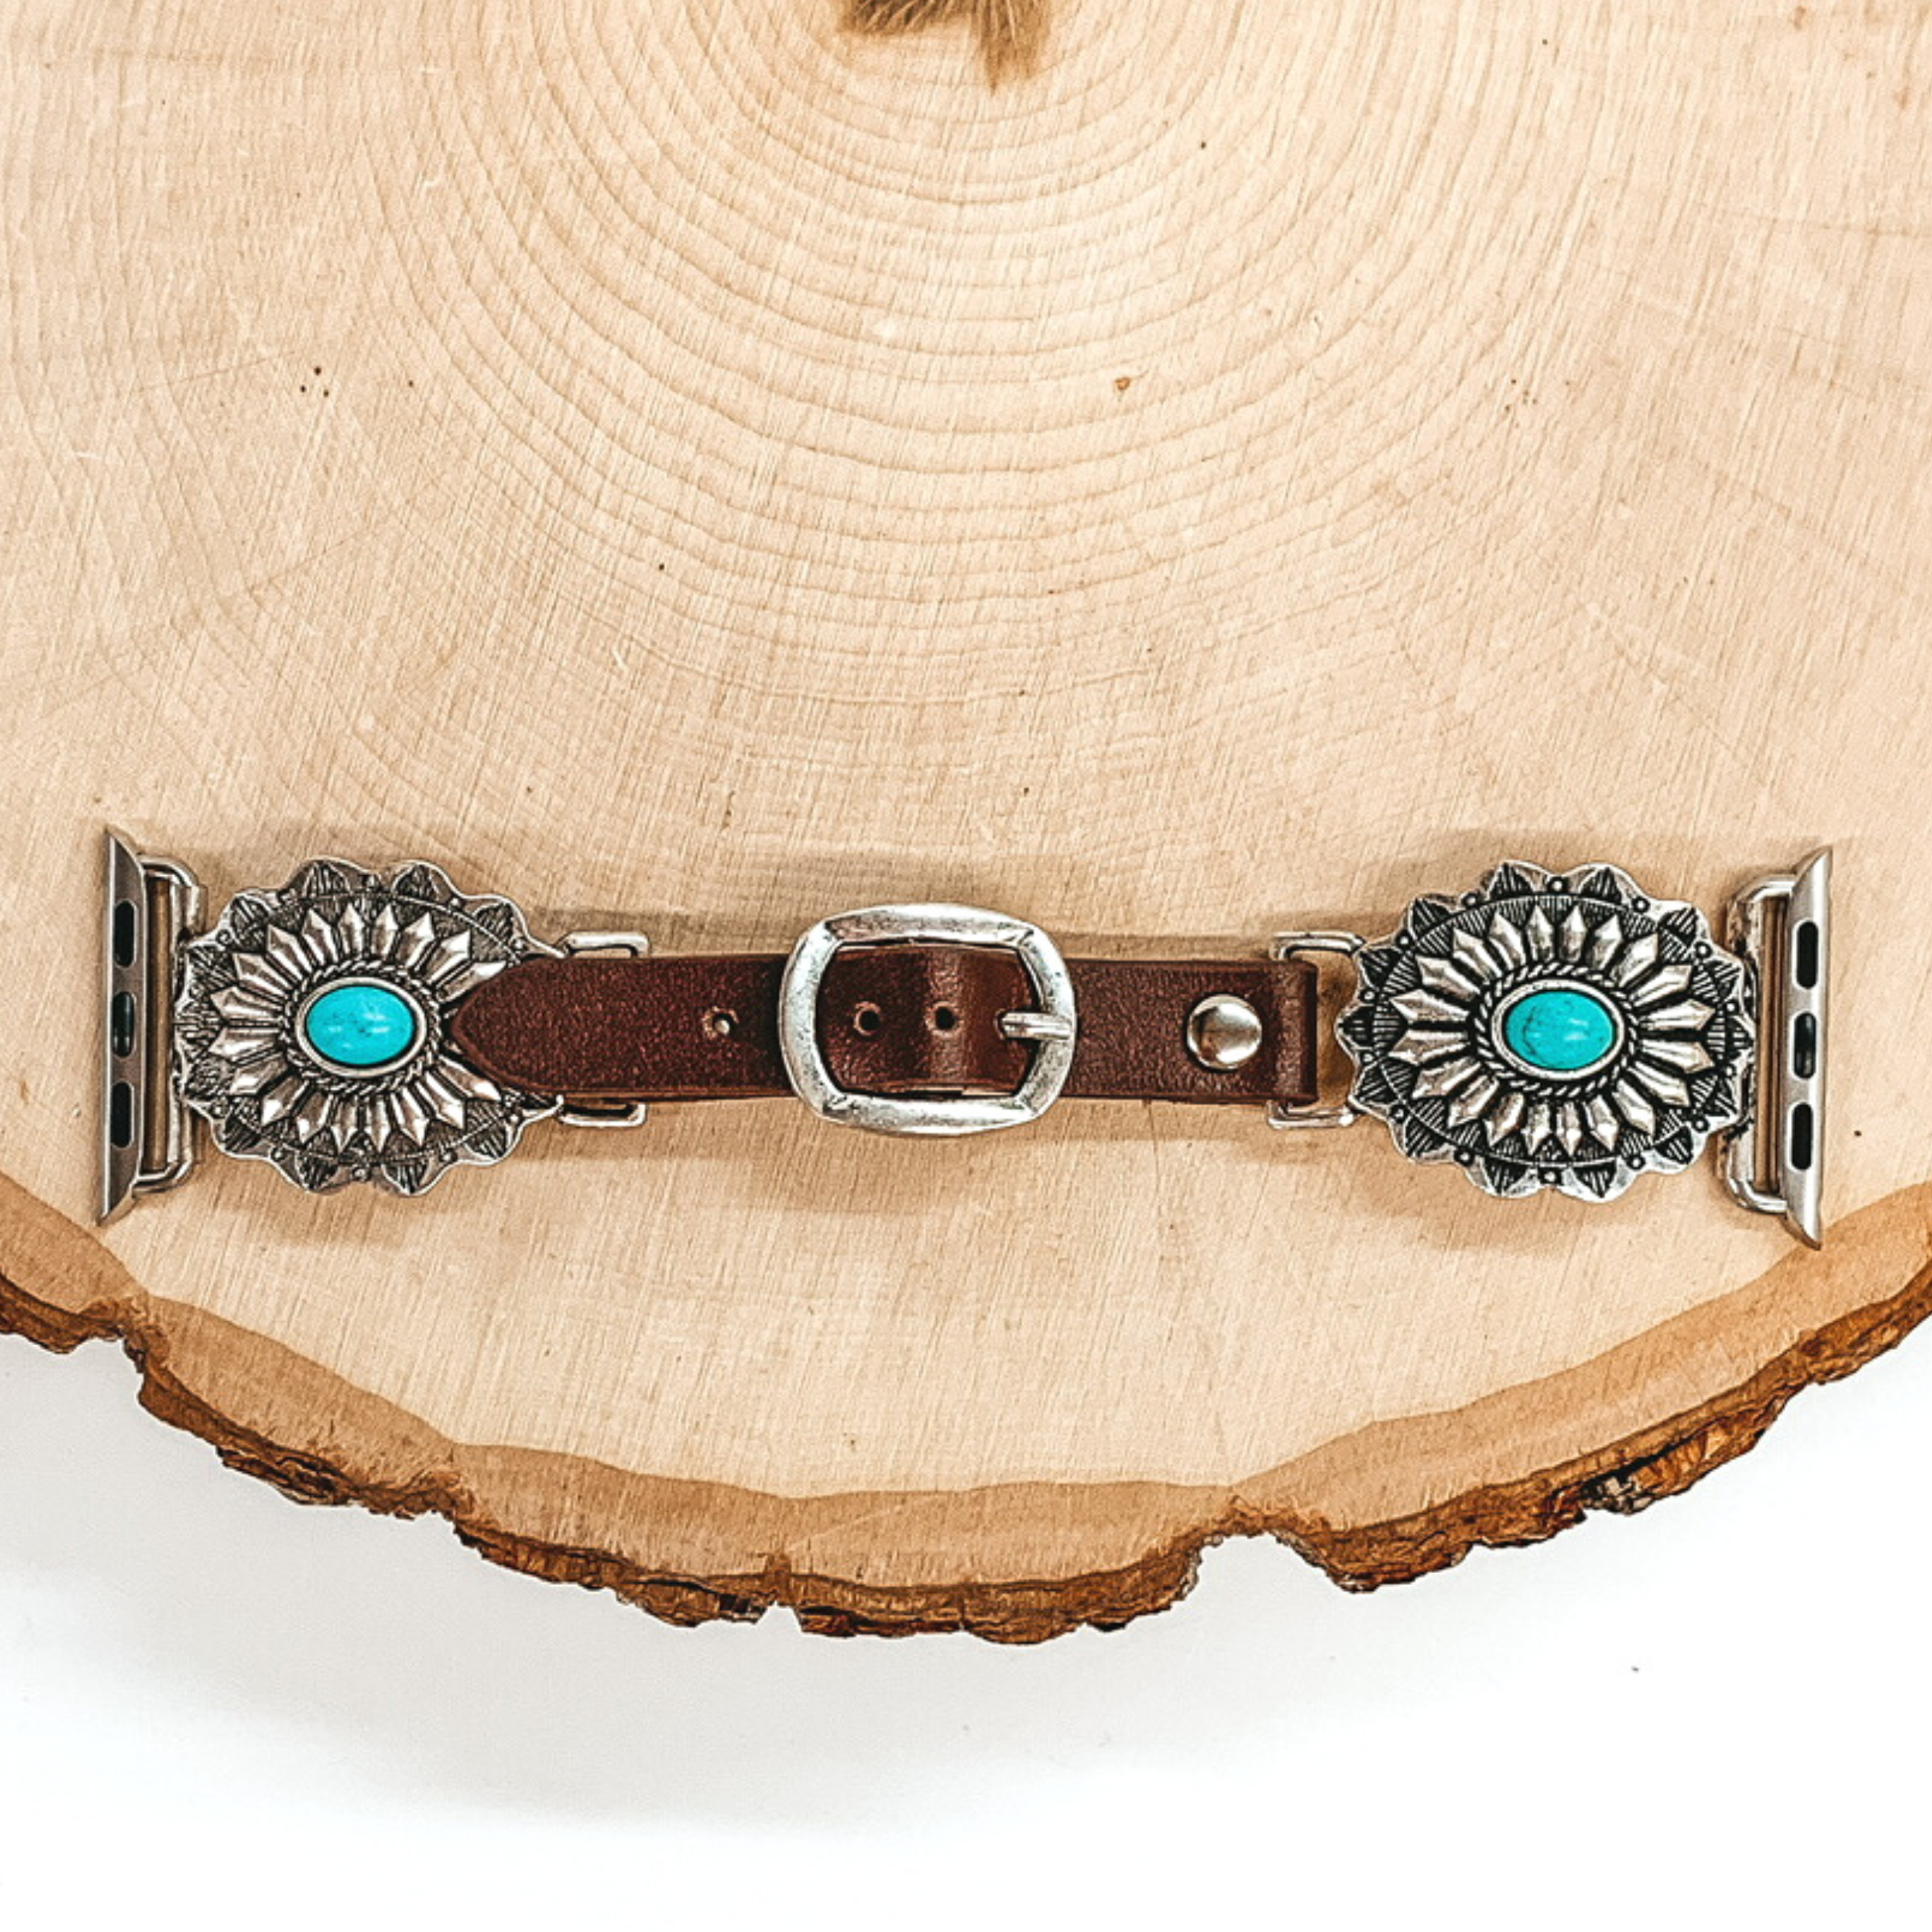 Dark Brown watch band with silver, oval concho ends with Apple watch band acessories. The conchos have small, center turquoise stone. This watch band is pictured on a piece of wood on a white background.